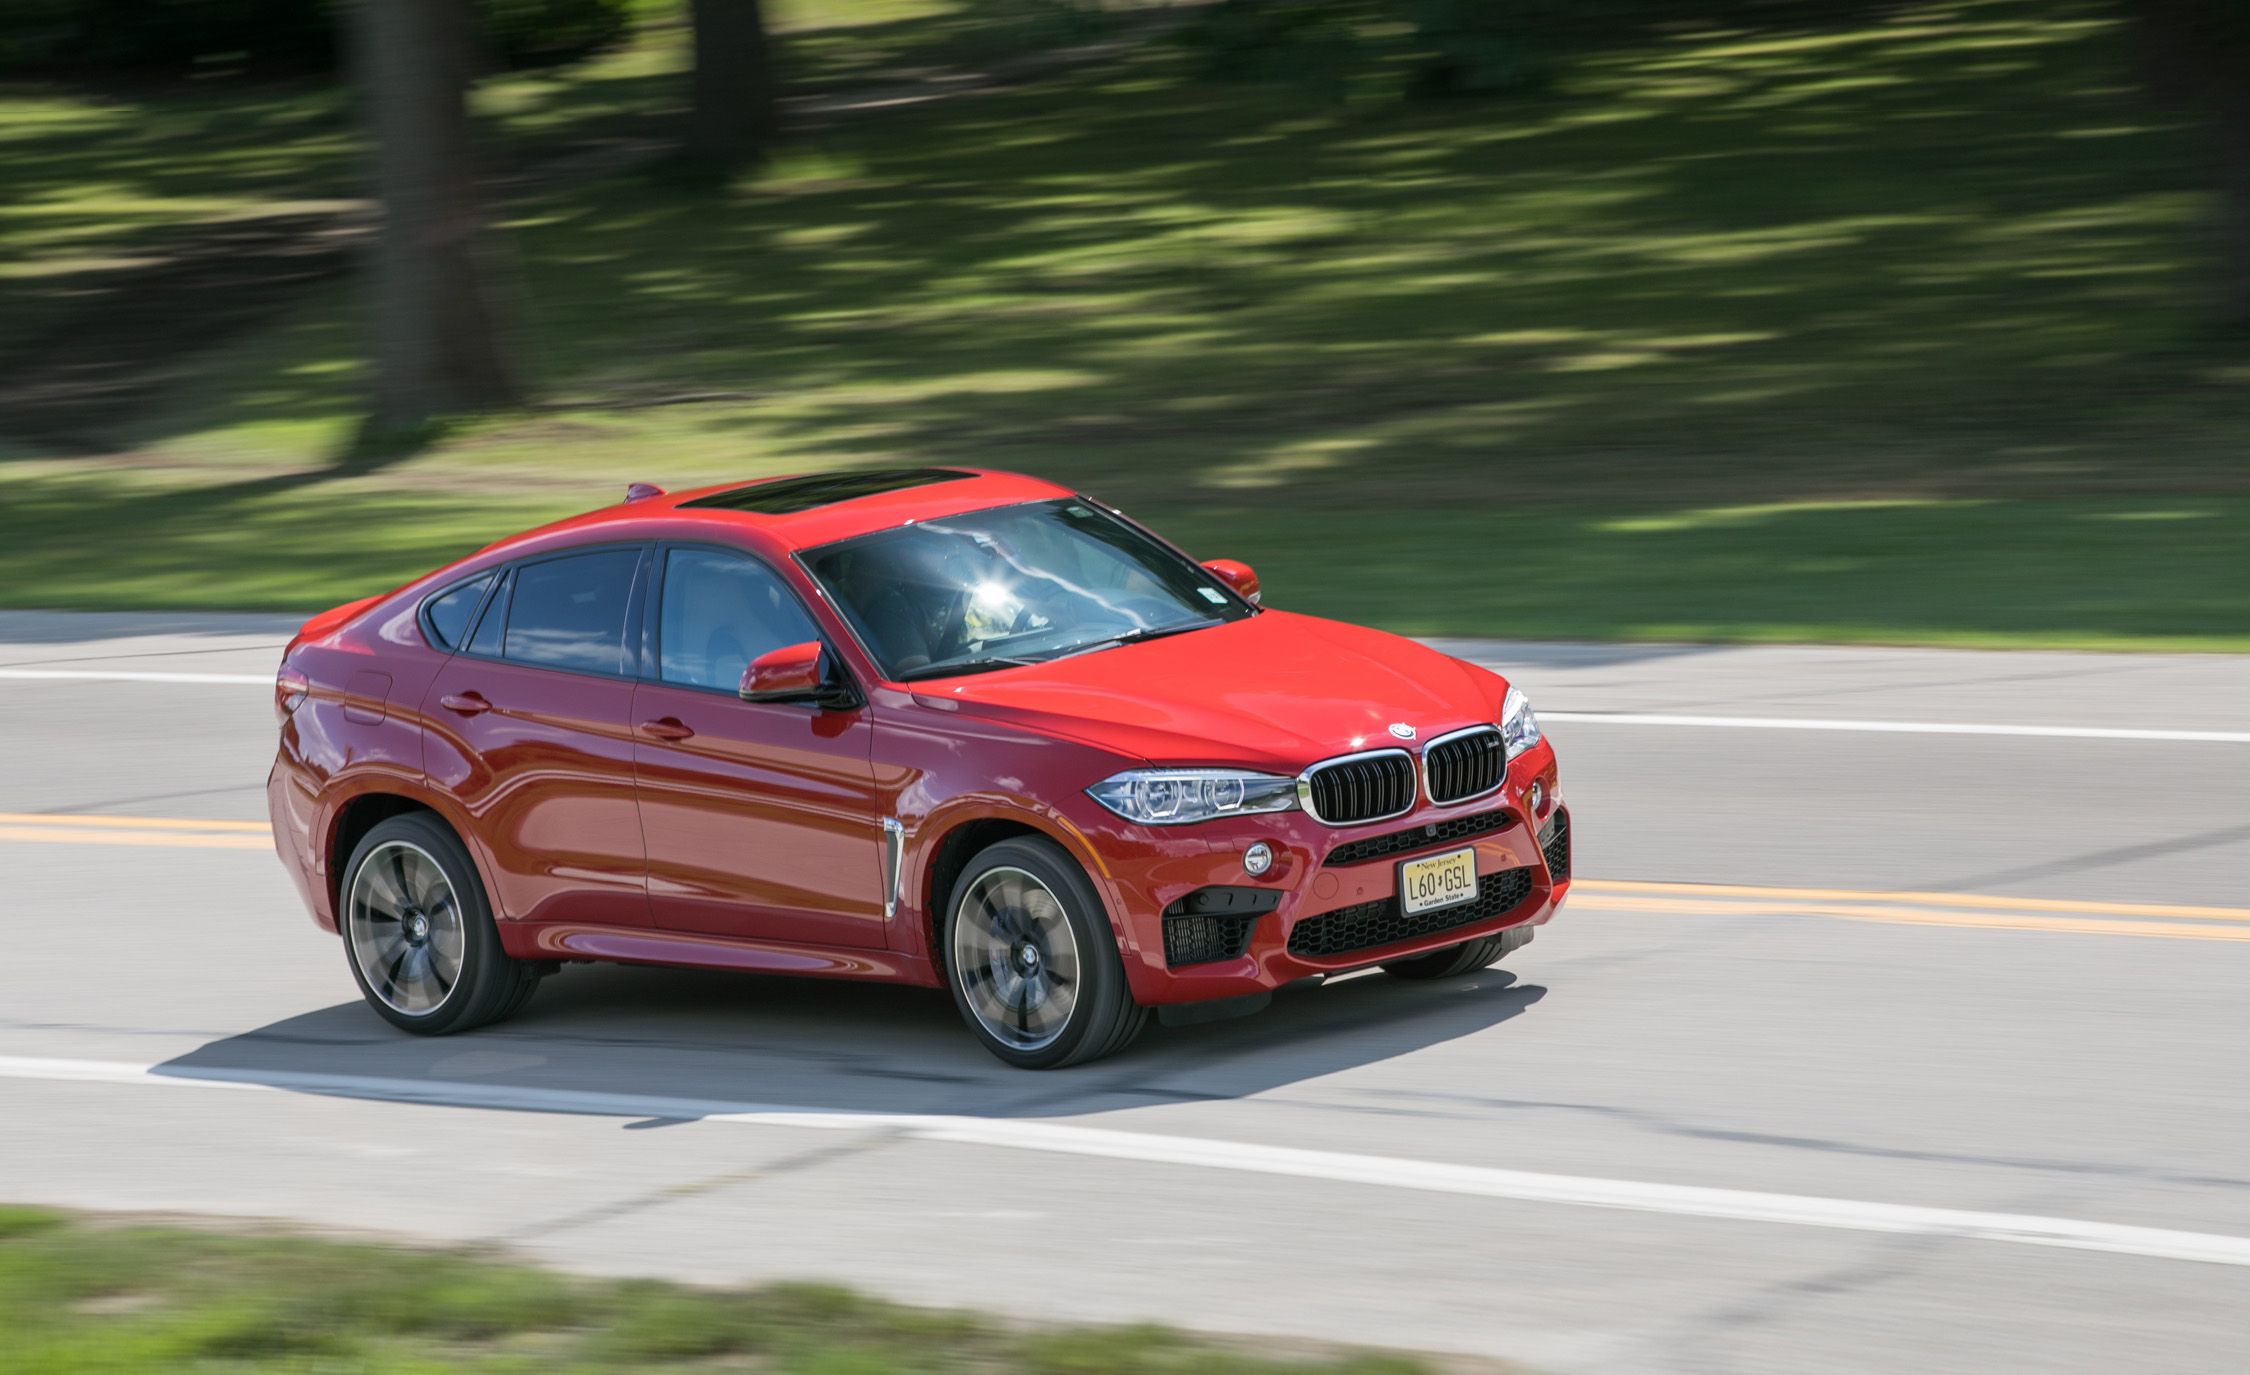 BMW X6 M Reviews | BMW X6 M Price, Photos, and Specs | Car and Driver